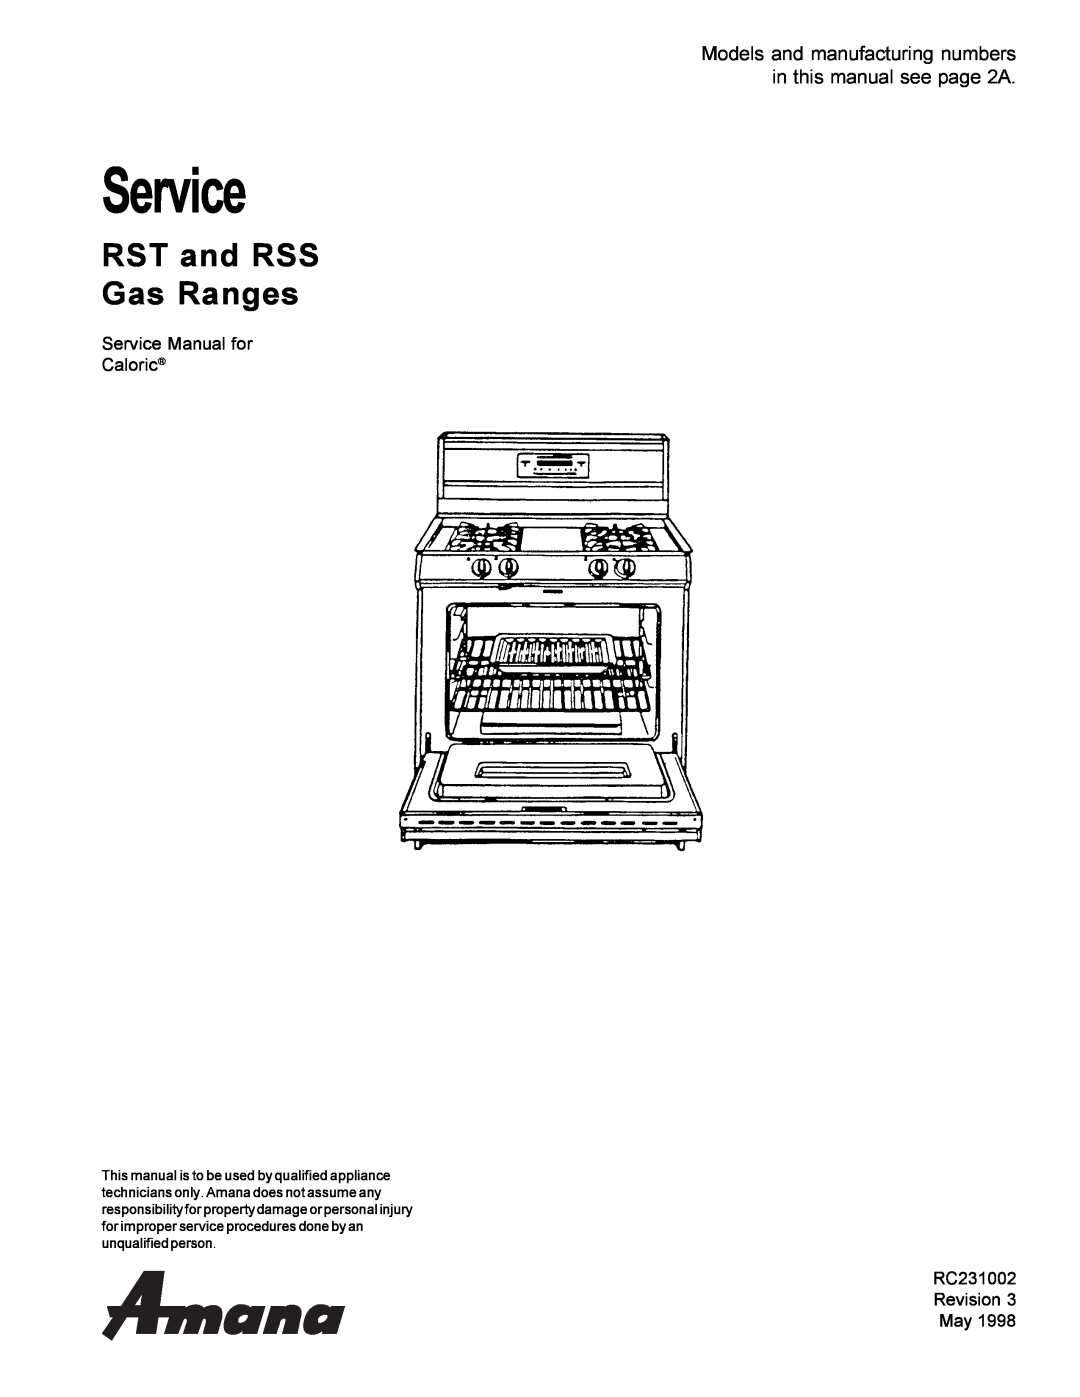 Amana service manual Service, RST and RSS Gas Ranges, Models and manufacturing numbers in this manual see page 2A 